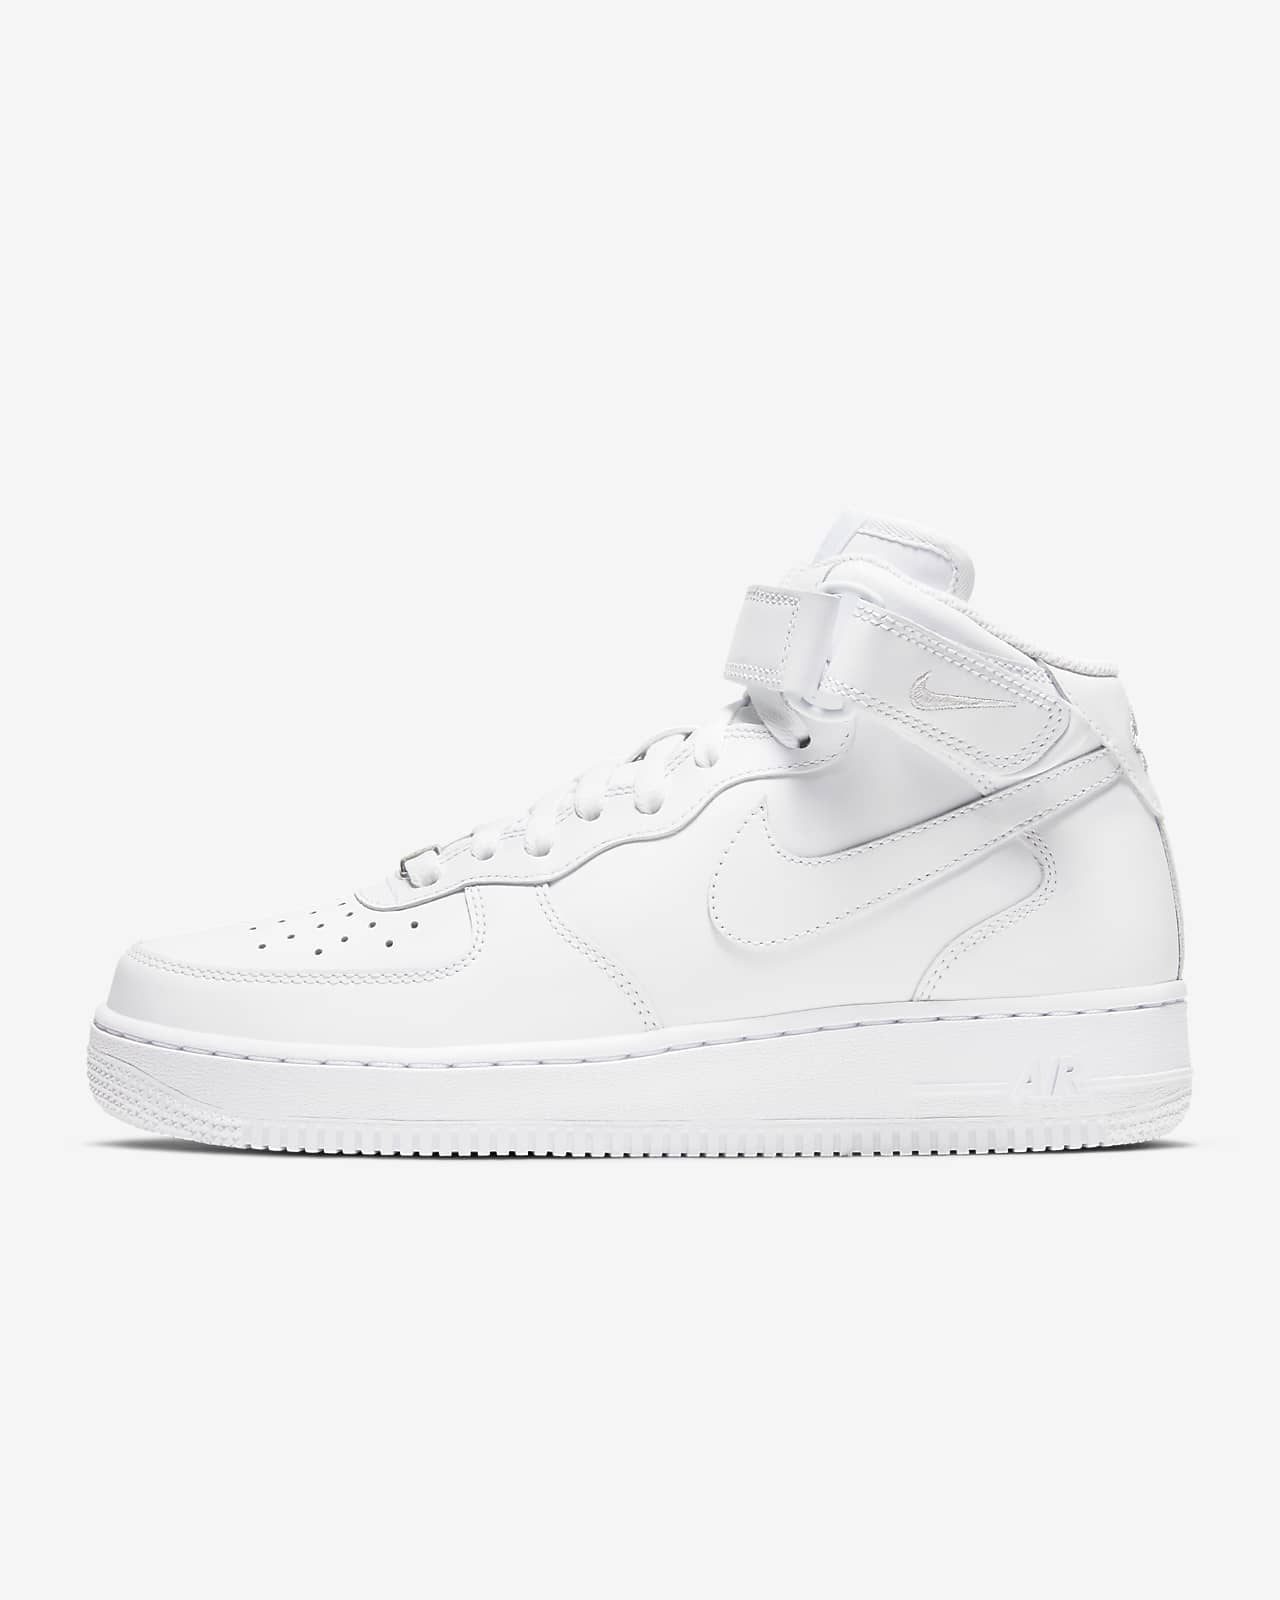 Chaussure Nike Air Force 1 '07 Mid pour Femme